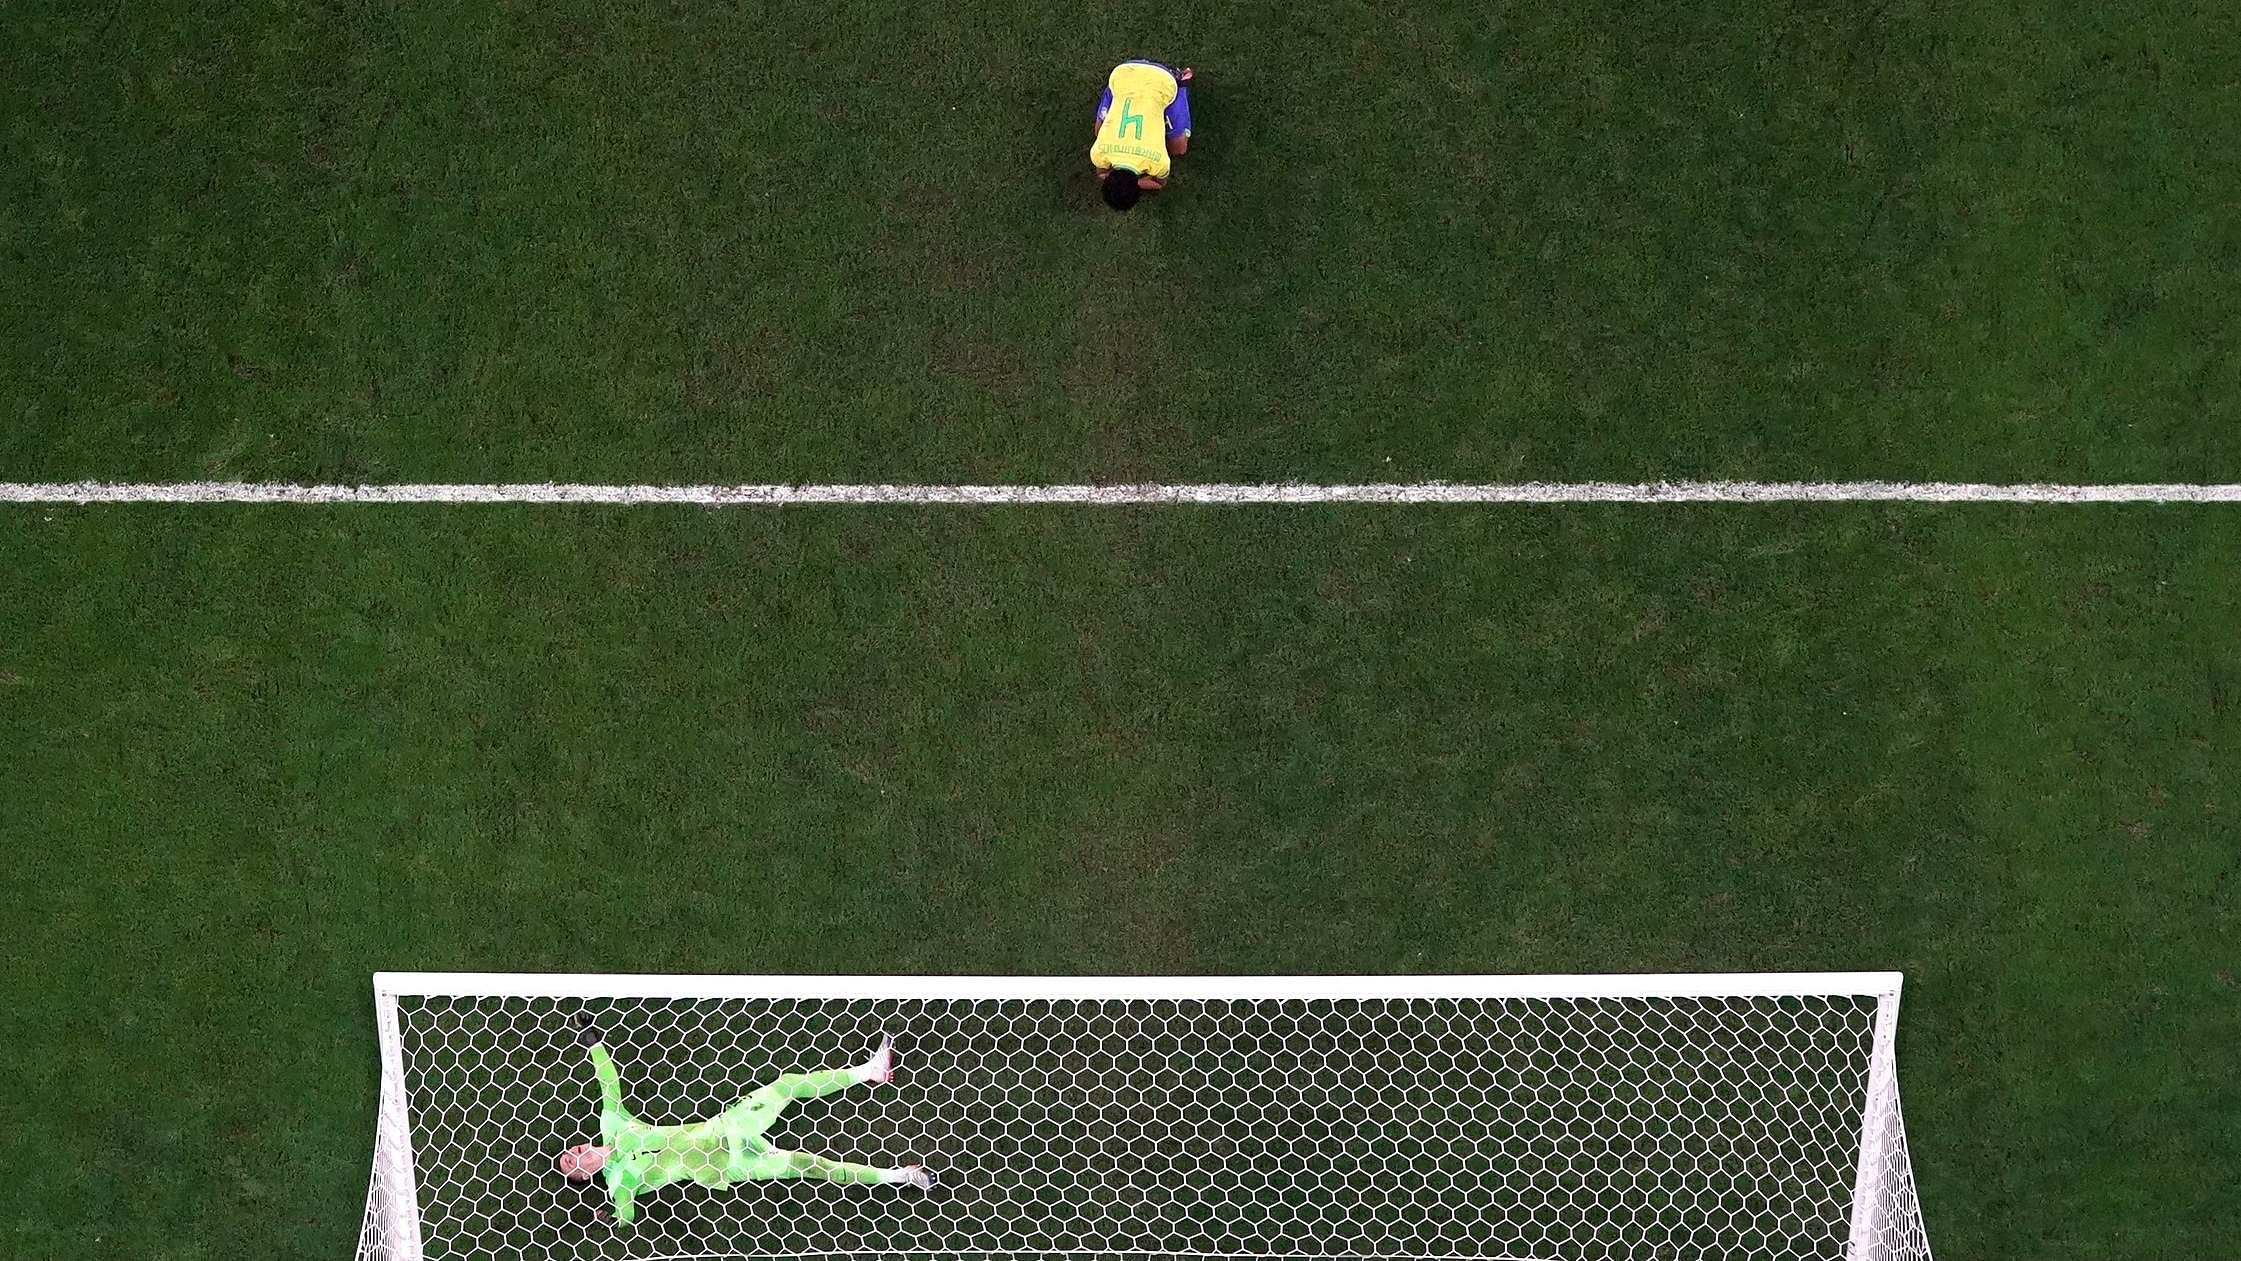 Croatia's Dominik Livakovic celebrates qualifying for the semi finals after saving a penalty missed by Brazil's Marquinhos. Credit: Reuters Photo